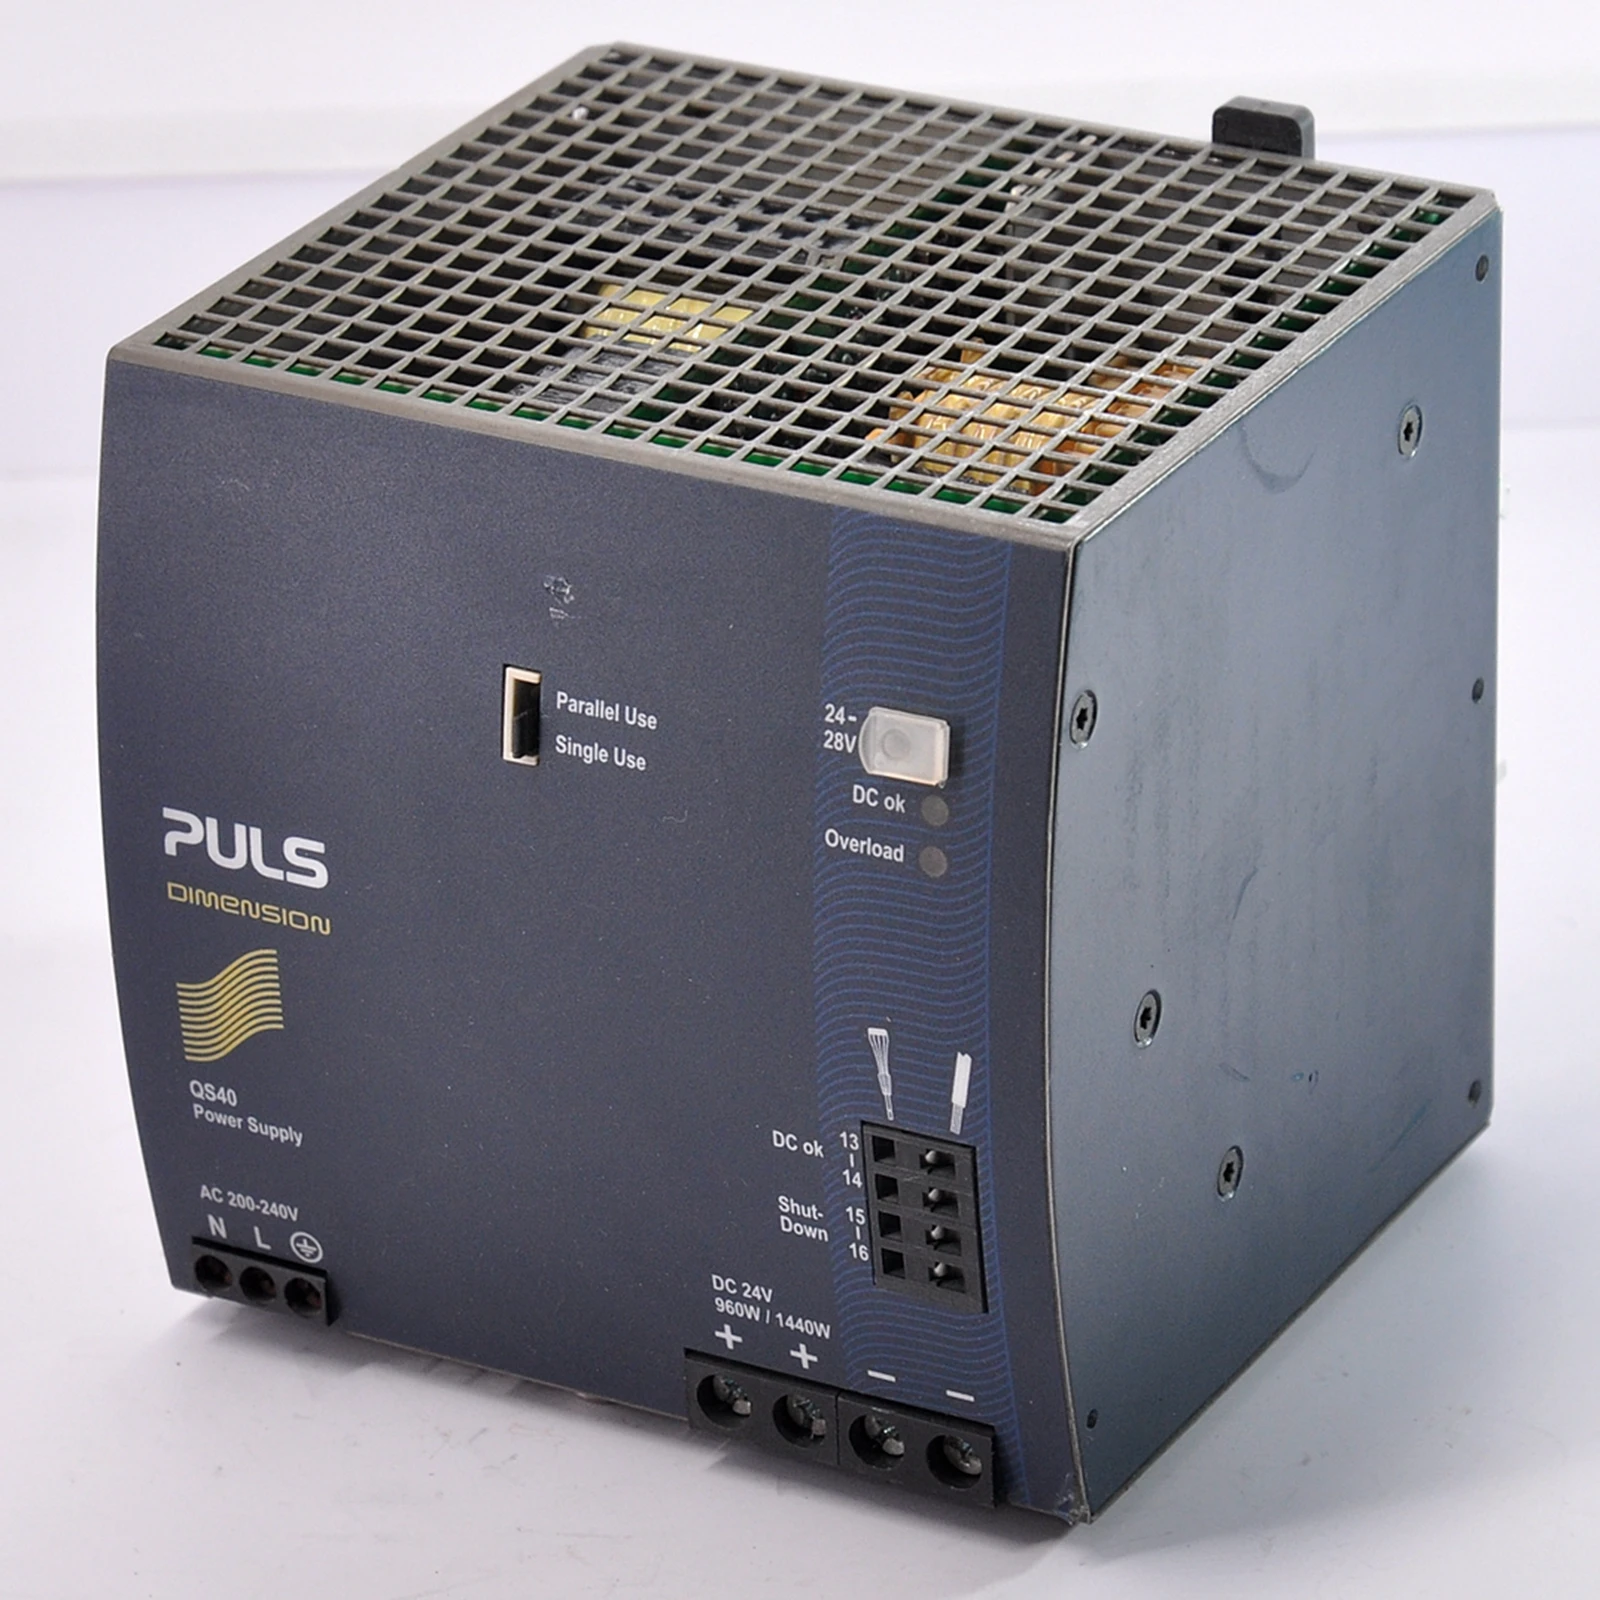 

PULS QS40.244 DIN rail switching power supply for 24V 40A 1-phase system